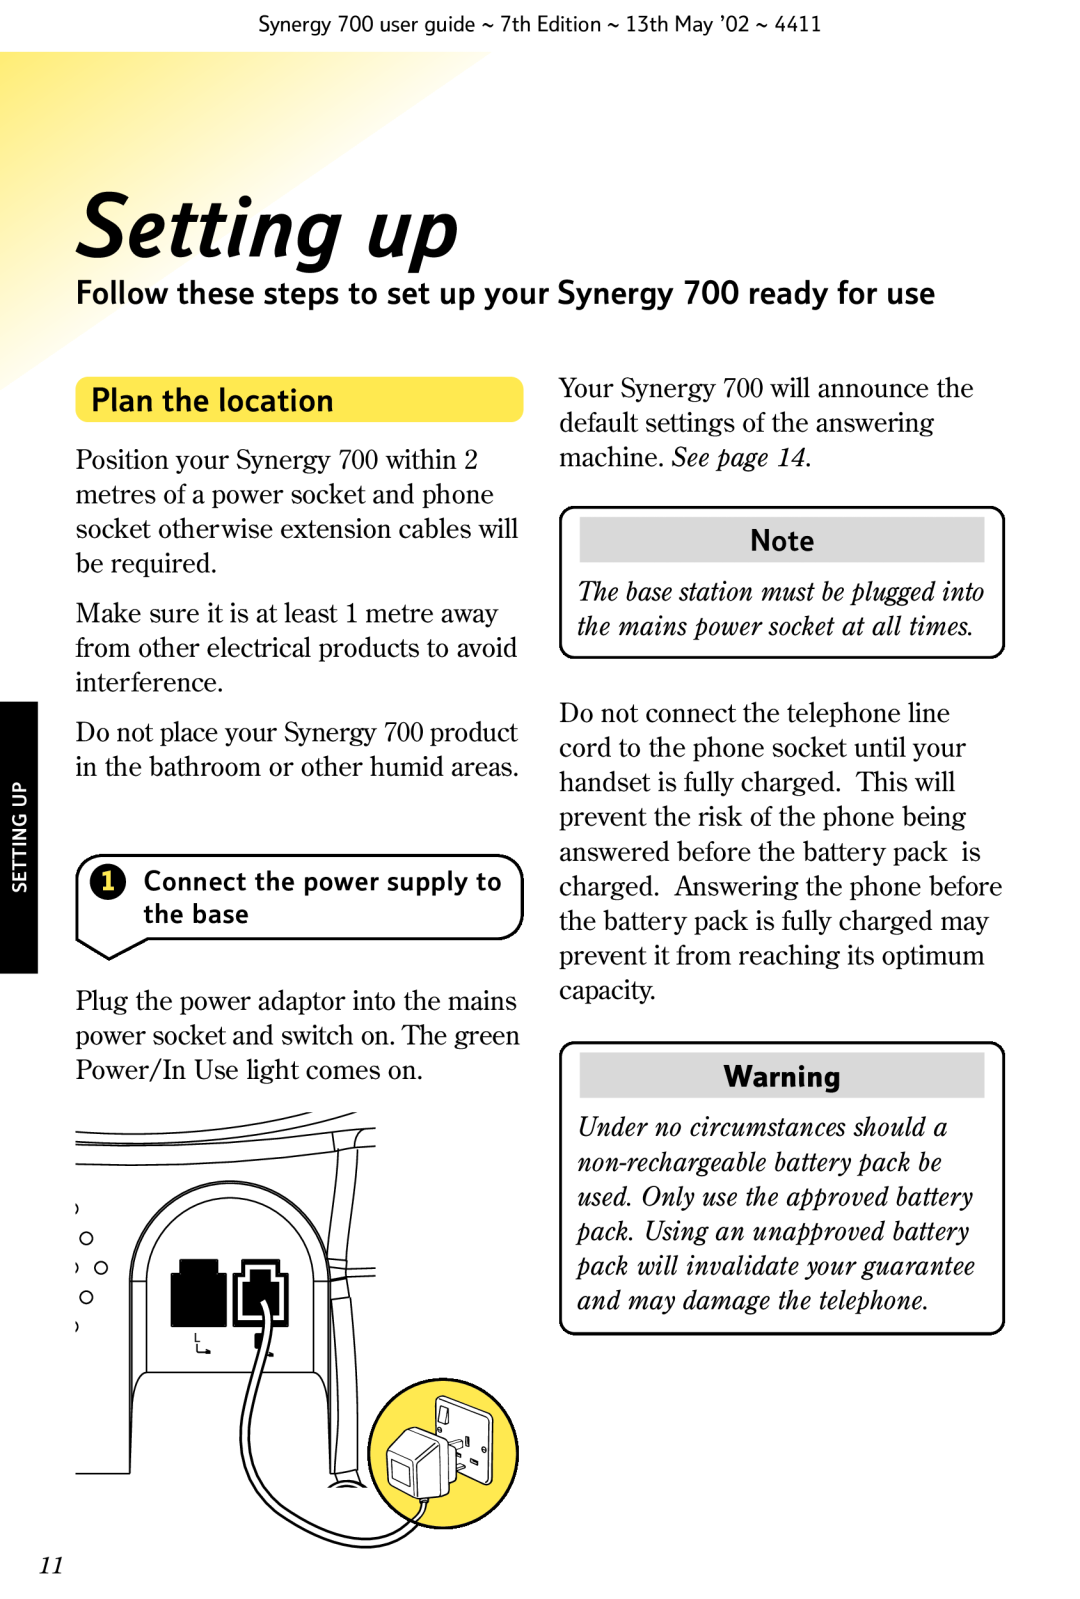 BT manual Setting up, Follow these steps to set up your Synergy 700 ready for use, Plan the location 